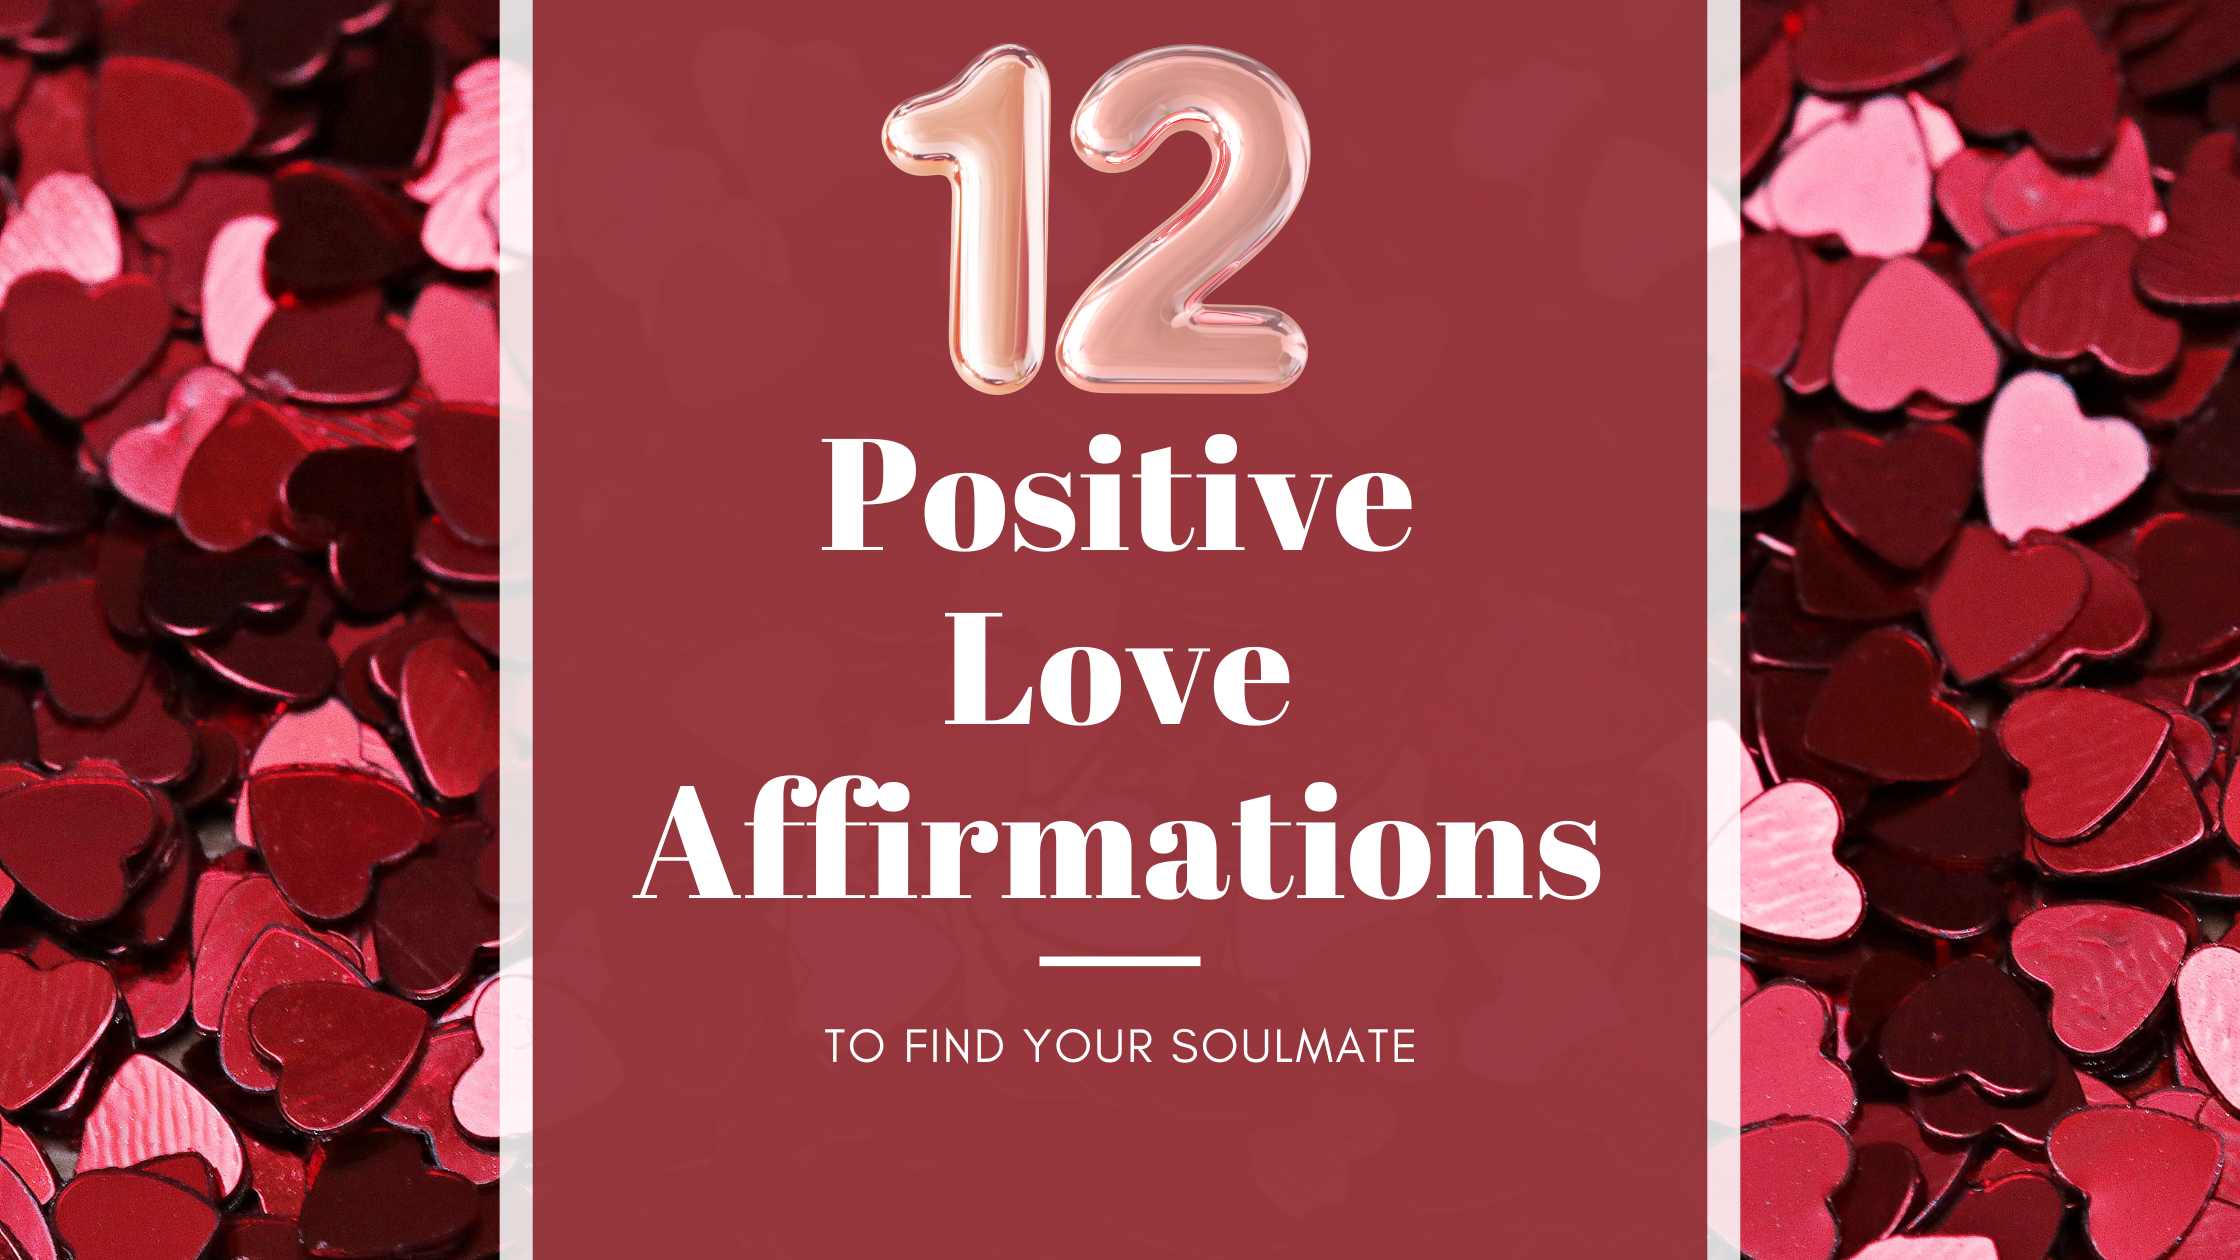 Manifest Love of Your Life, Soulmate, Law of Attraction, Manifestation  Tool, Universe Order Form, Manifest Love, Manifest Soulmate, Love 